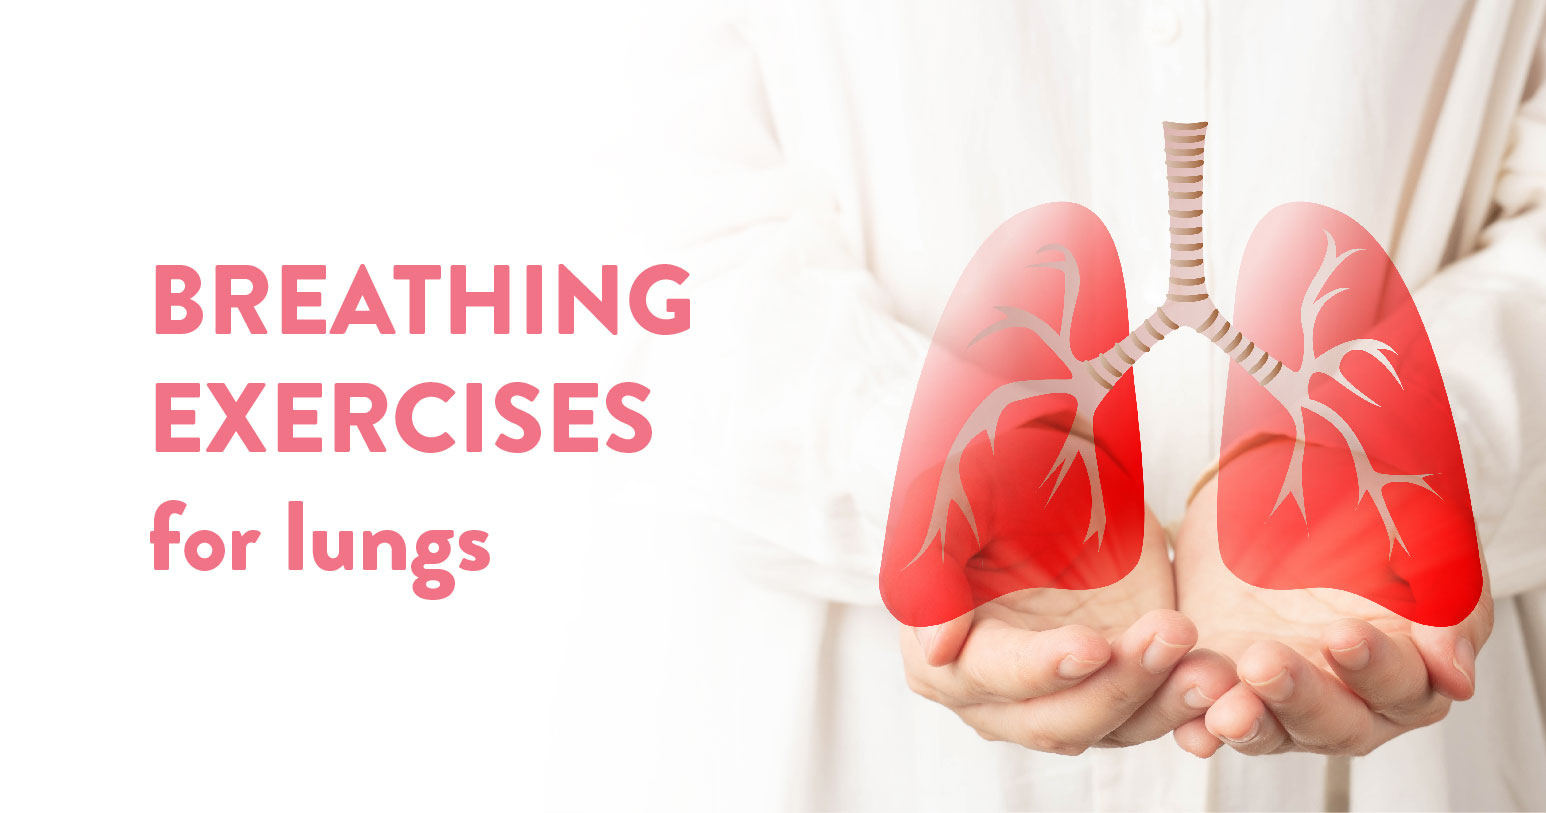 Breathing exercises to increase lung capacity